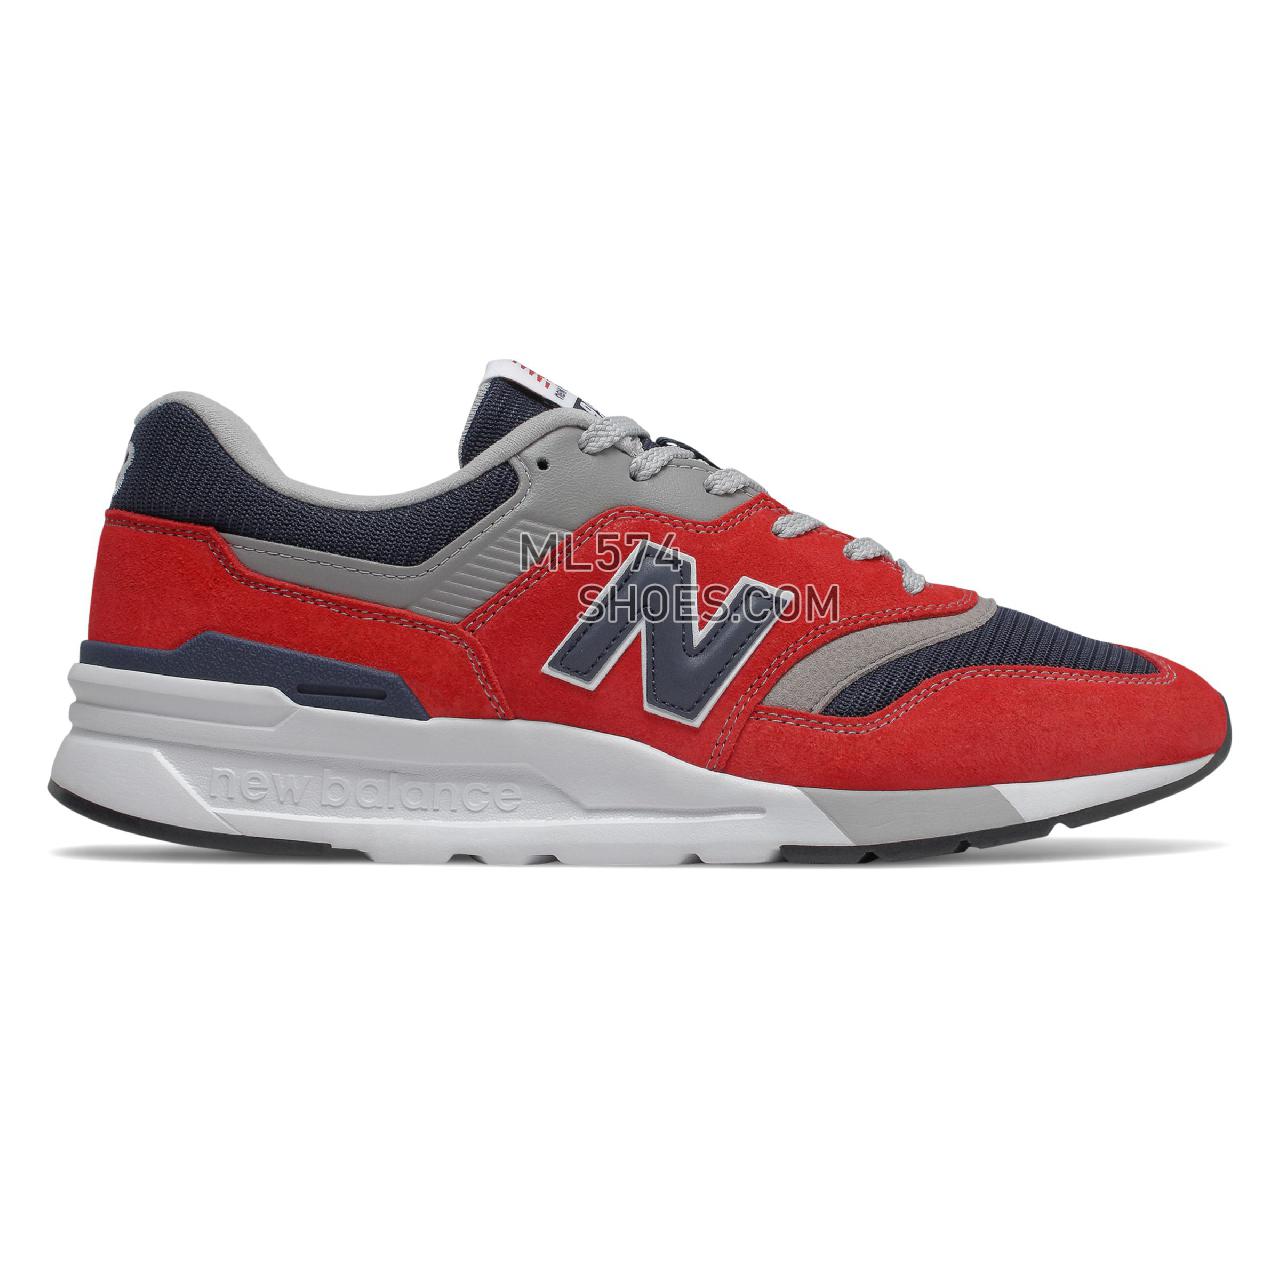 New Balance 997H - Men's Classic Sneakers - Team Red with Pigment - CM997HBJ